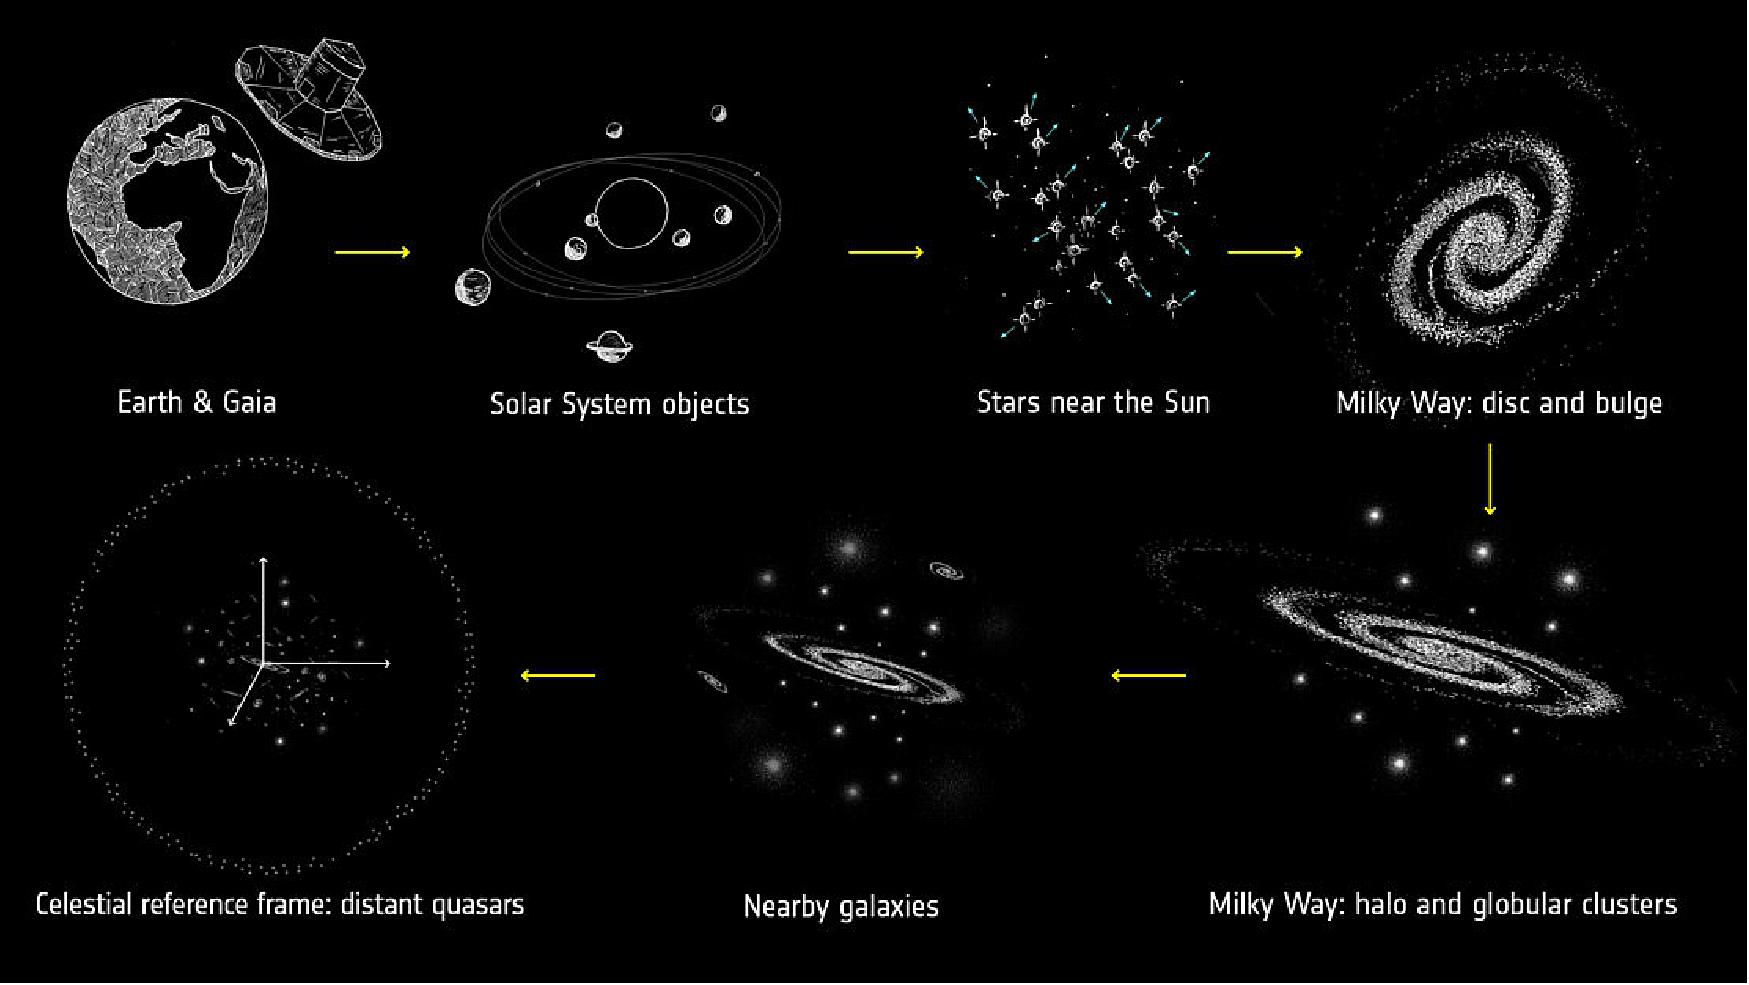 Figure 46: The second data release from ESA's Gaia mission contains a high-precision catalog of the entire sky, covering celestial objects near and far. It includes objects such as asteroids in our Solar System as well as the stellar population of our Milky Way Galaxy and its satellites – globular clusters and nearby galaxies. It also extends to distant quasars that are being used to define a new celestial reference system. -This infographic summarizes the cosmic scales covered by this comprehensive dataset, which provides a wide range of topics for the astronomy community (image credit: ESA, CC BY-SA 3.0 IGO) 46)